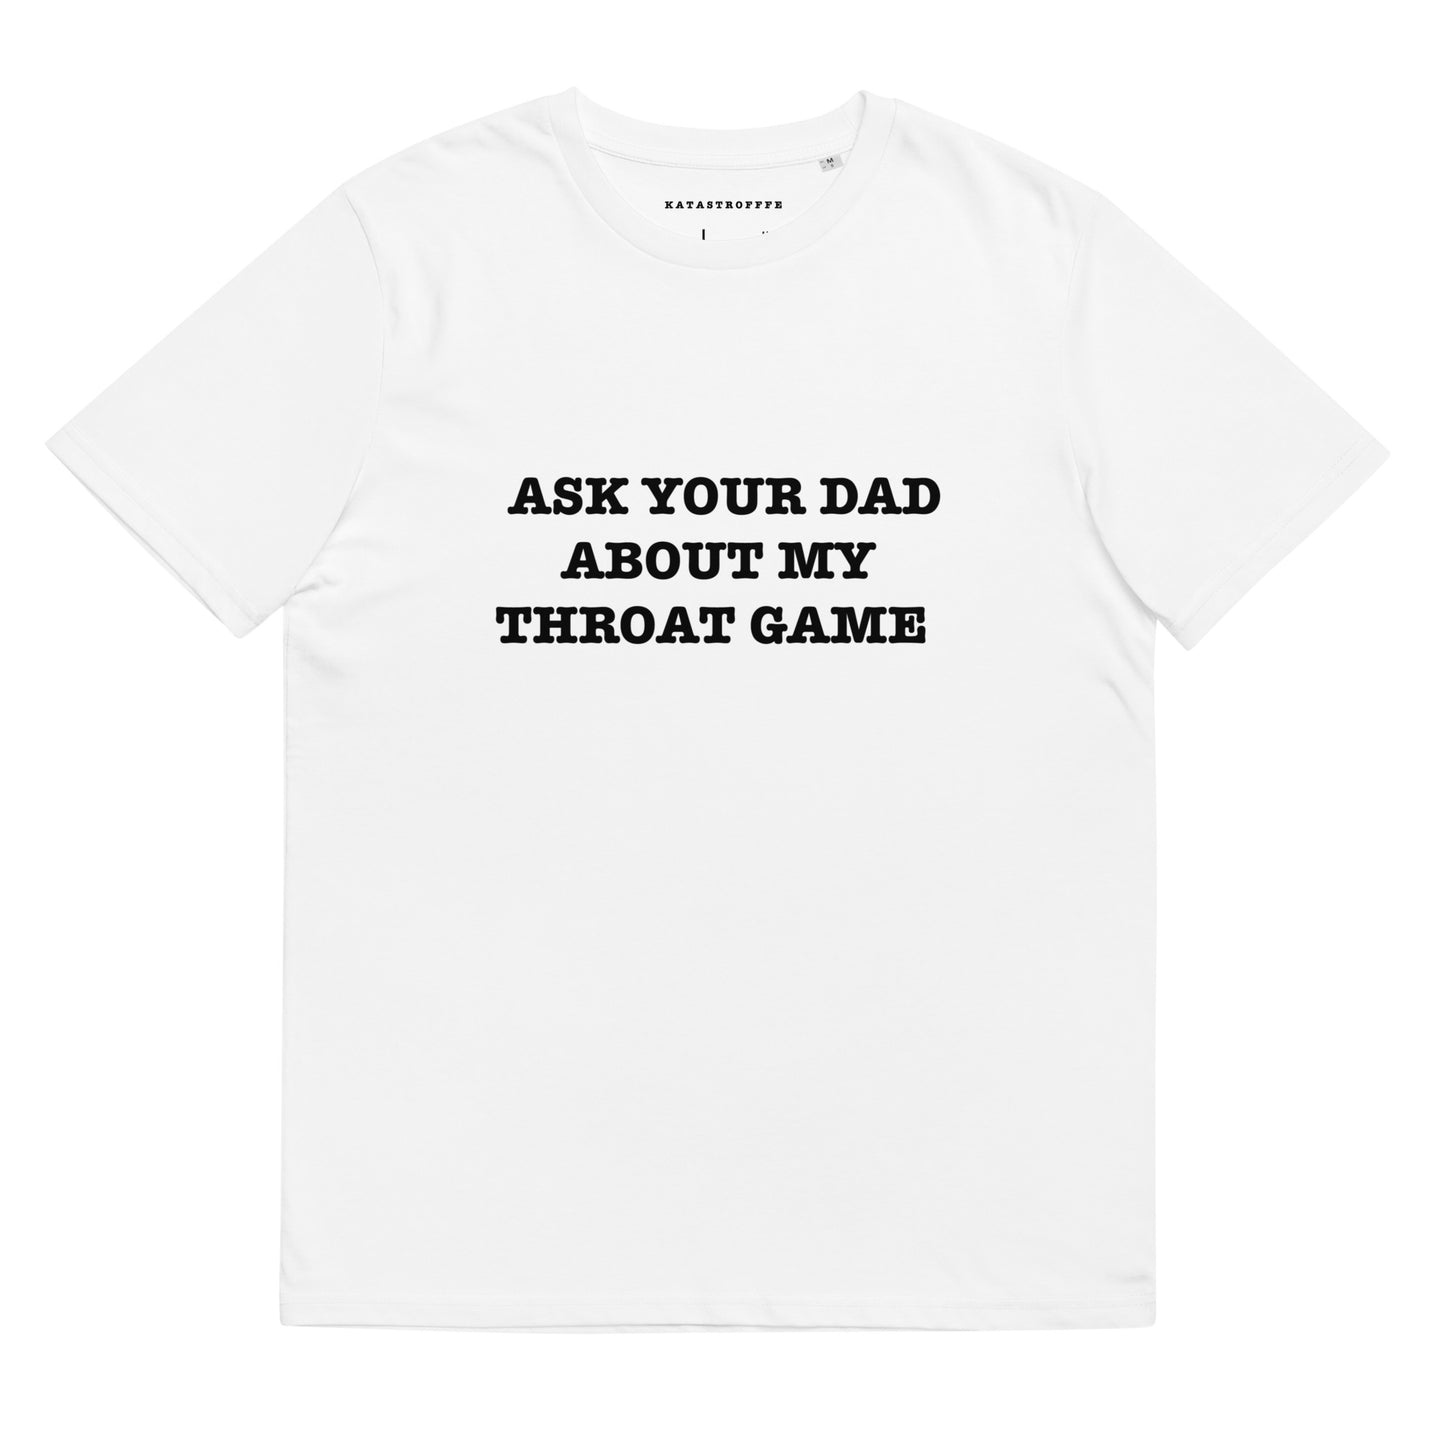 ASK YOUR DAD ABOUT MY THROAT GAME Katastrofffe Unisex organic cotton t-shirt